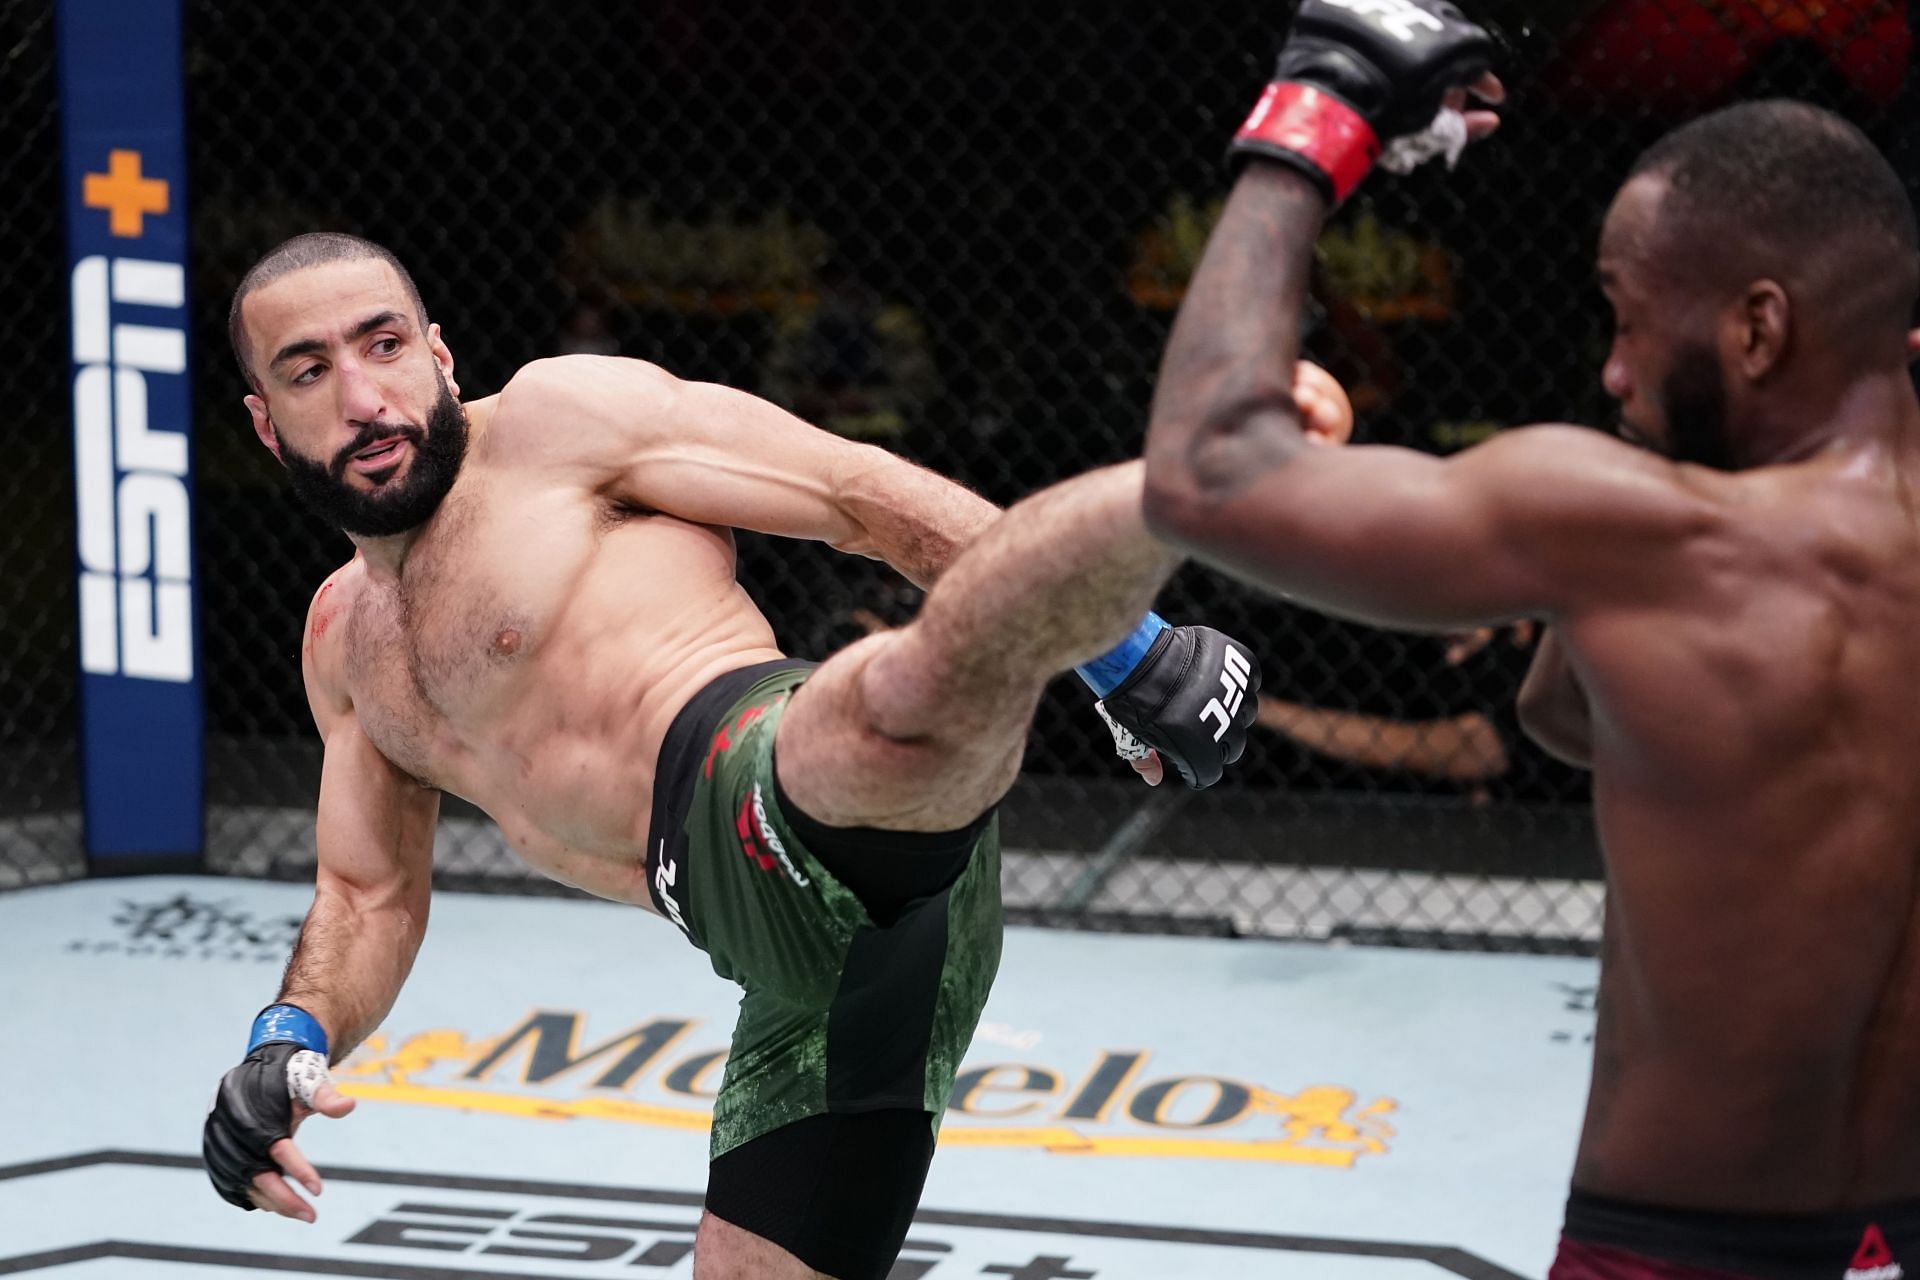 Belal Muhammad's lack of finish places in the octagon may prevent him from fighting for the title